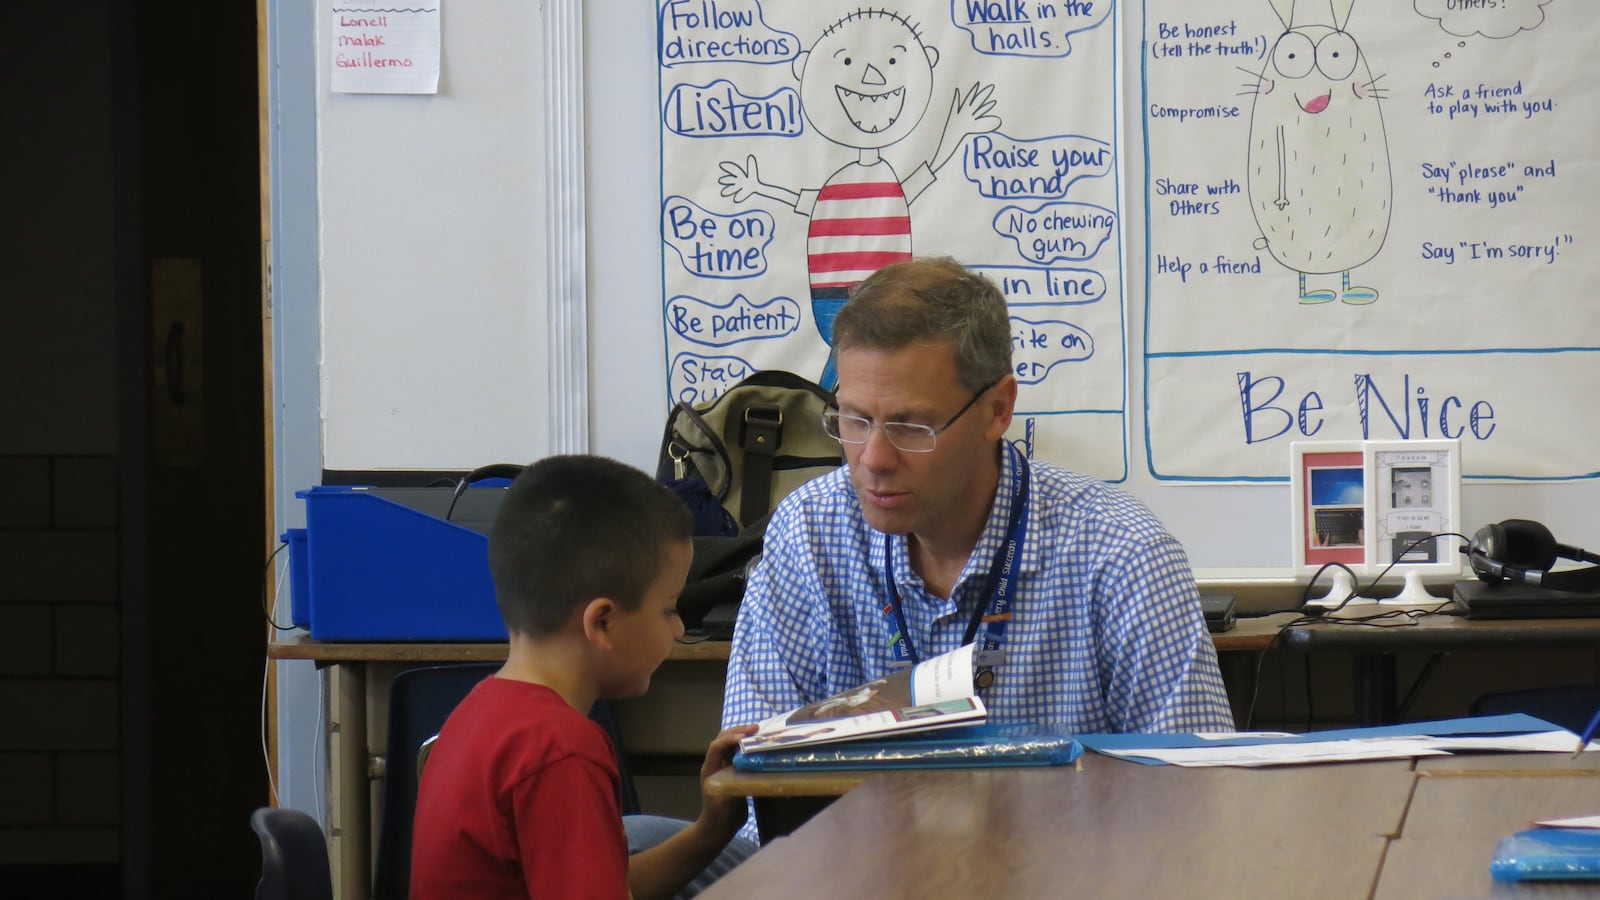 DPS superintendent Tom Boasberg reads with a student at an event called Power Lunch.